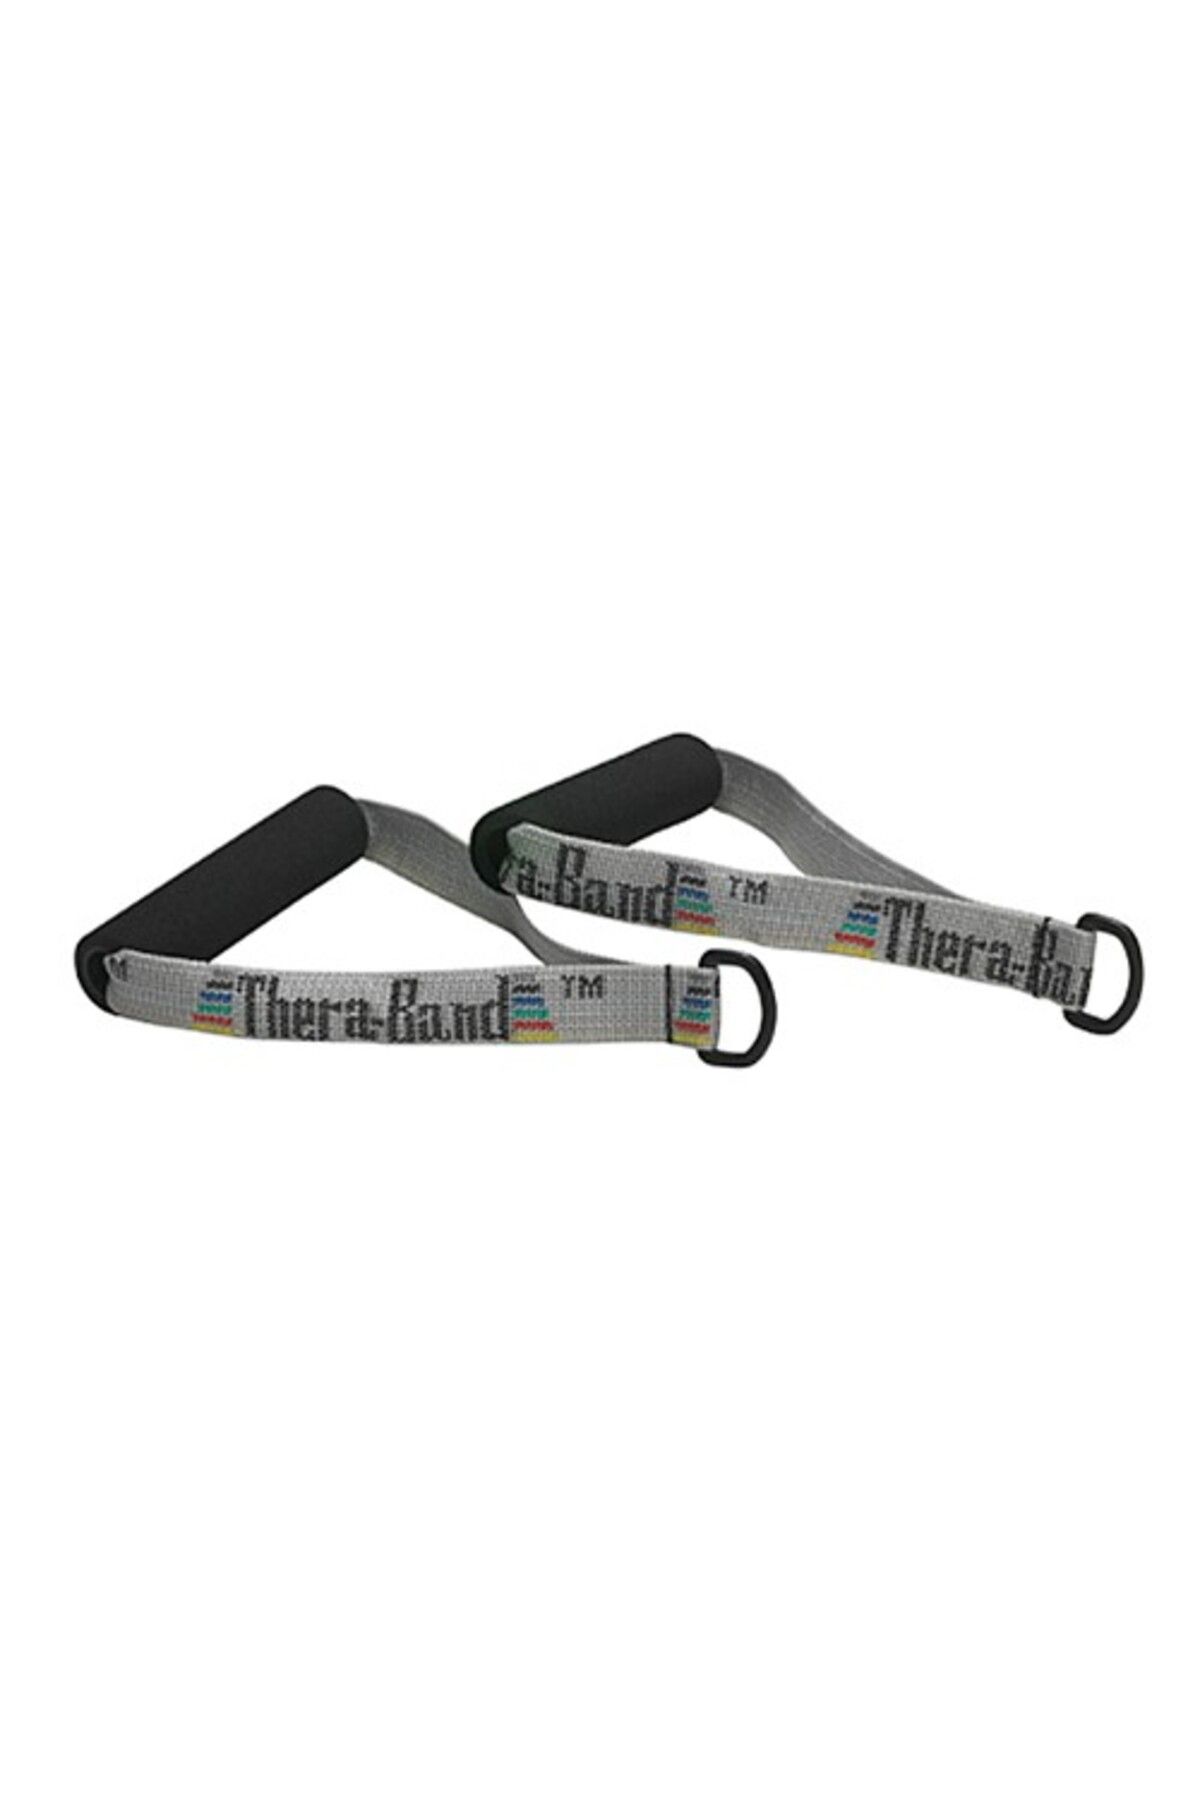 Theraband ® Exercise Handles With ''d''ring Connector,set Of 2